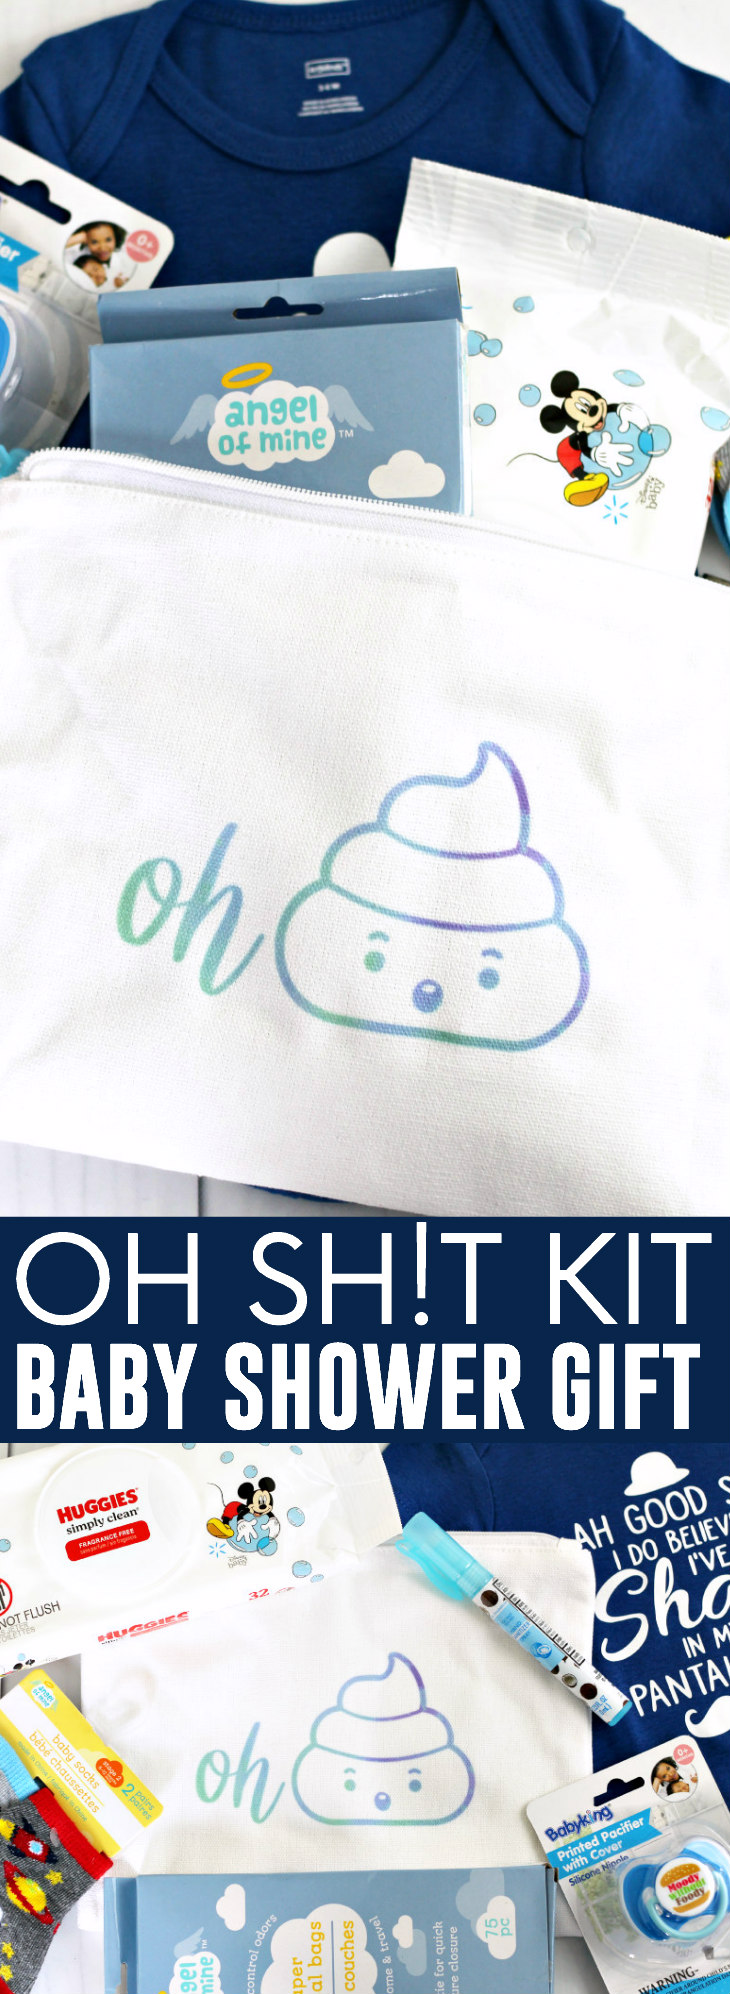 Oh Sh!t Kit Baby Shower Gift pinnable image.